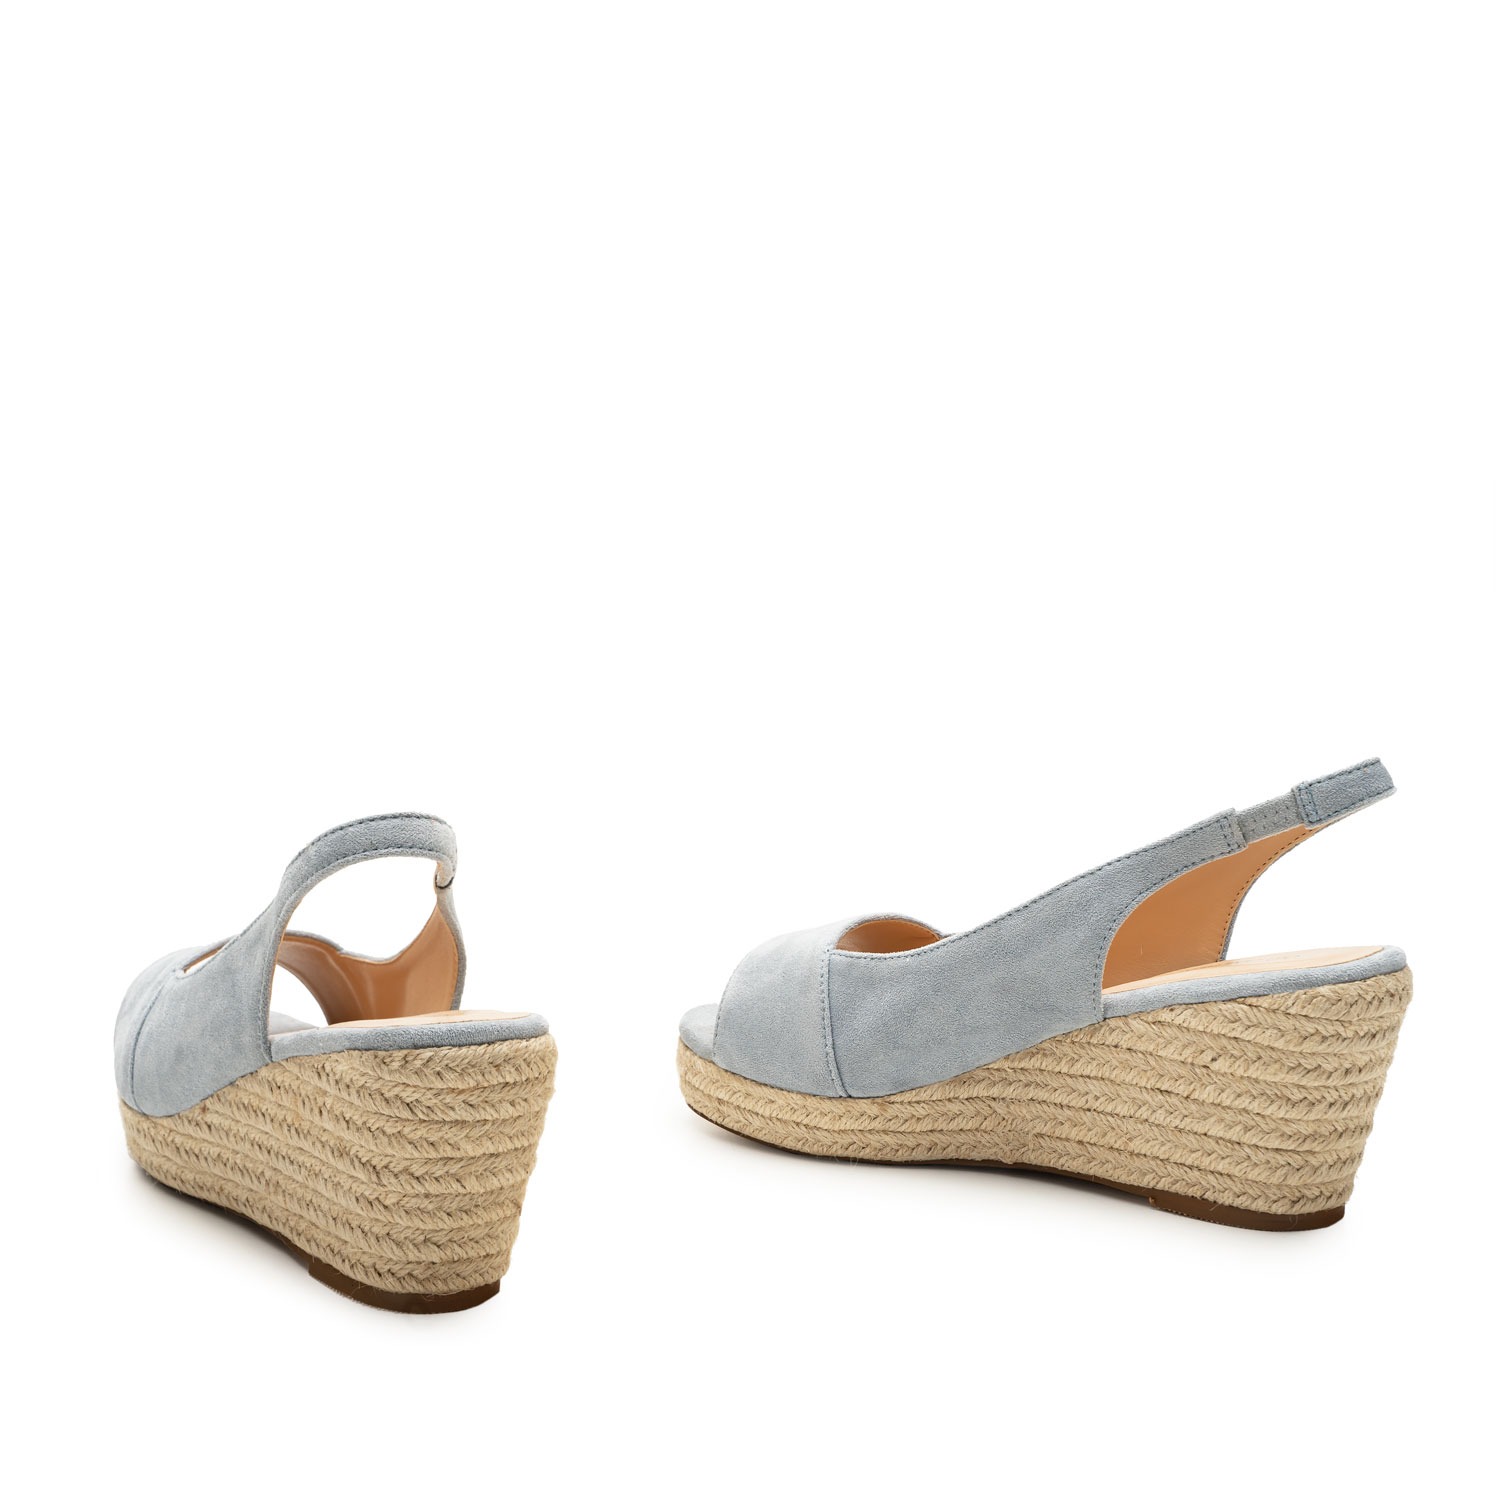 Light Blue Faux Suede Espadrilles with Jute Wedge 